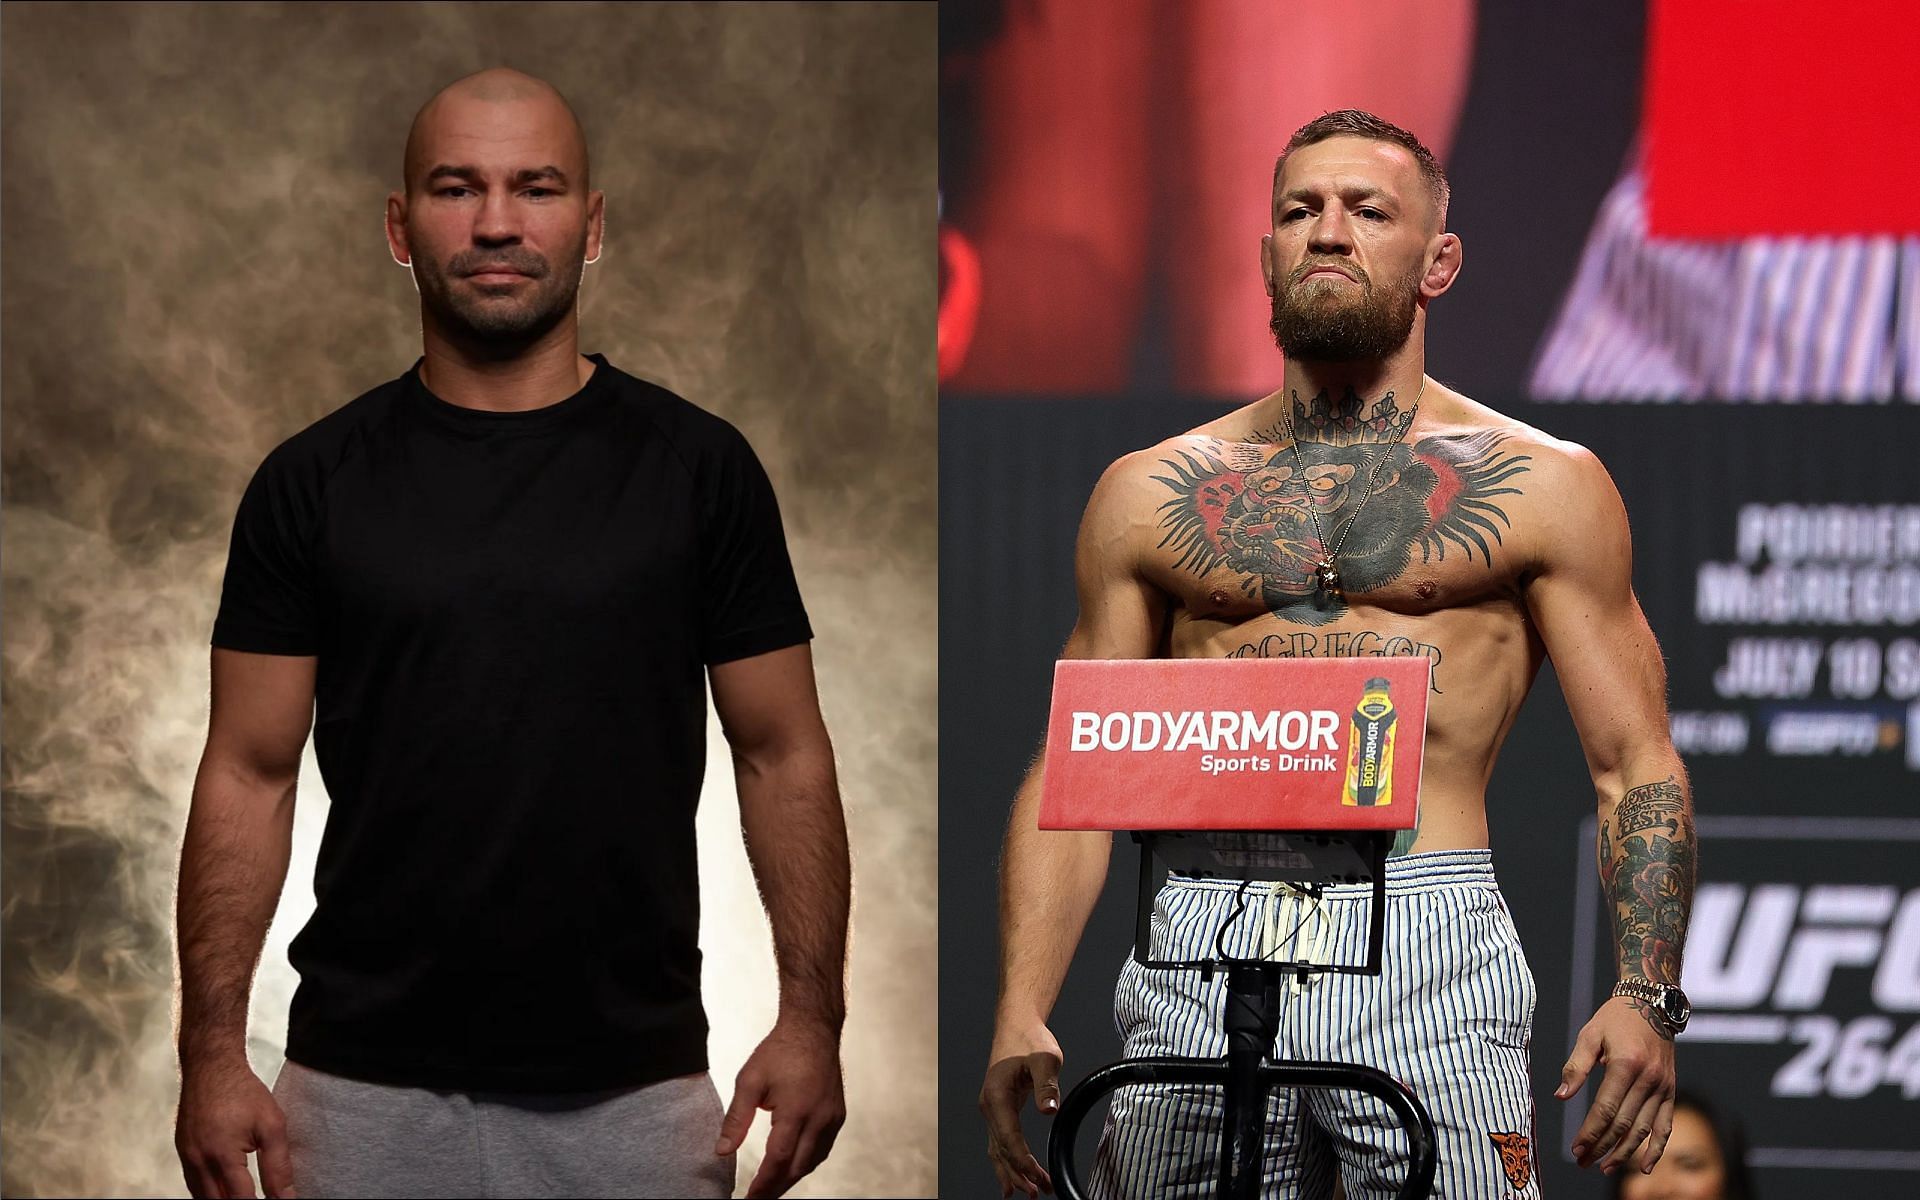 Artem Lobov (left) and Conor McGregor (right) [Image Courtesy: Getty Images]